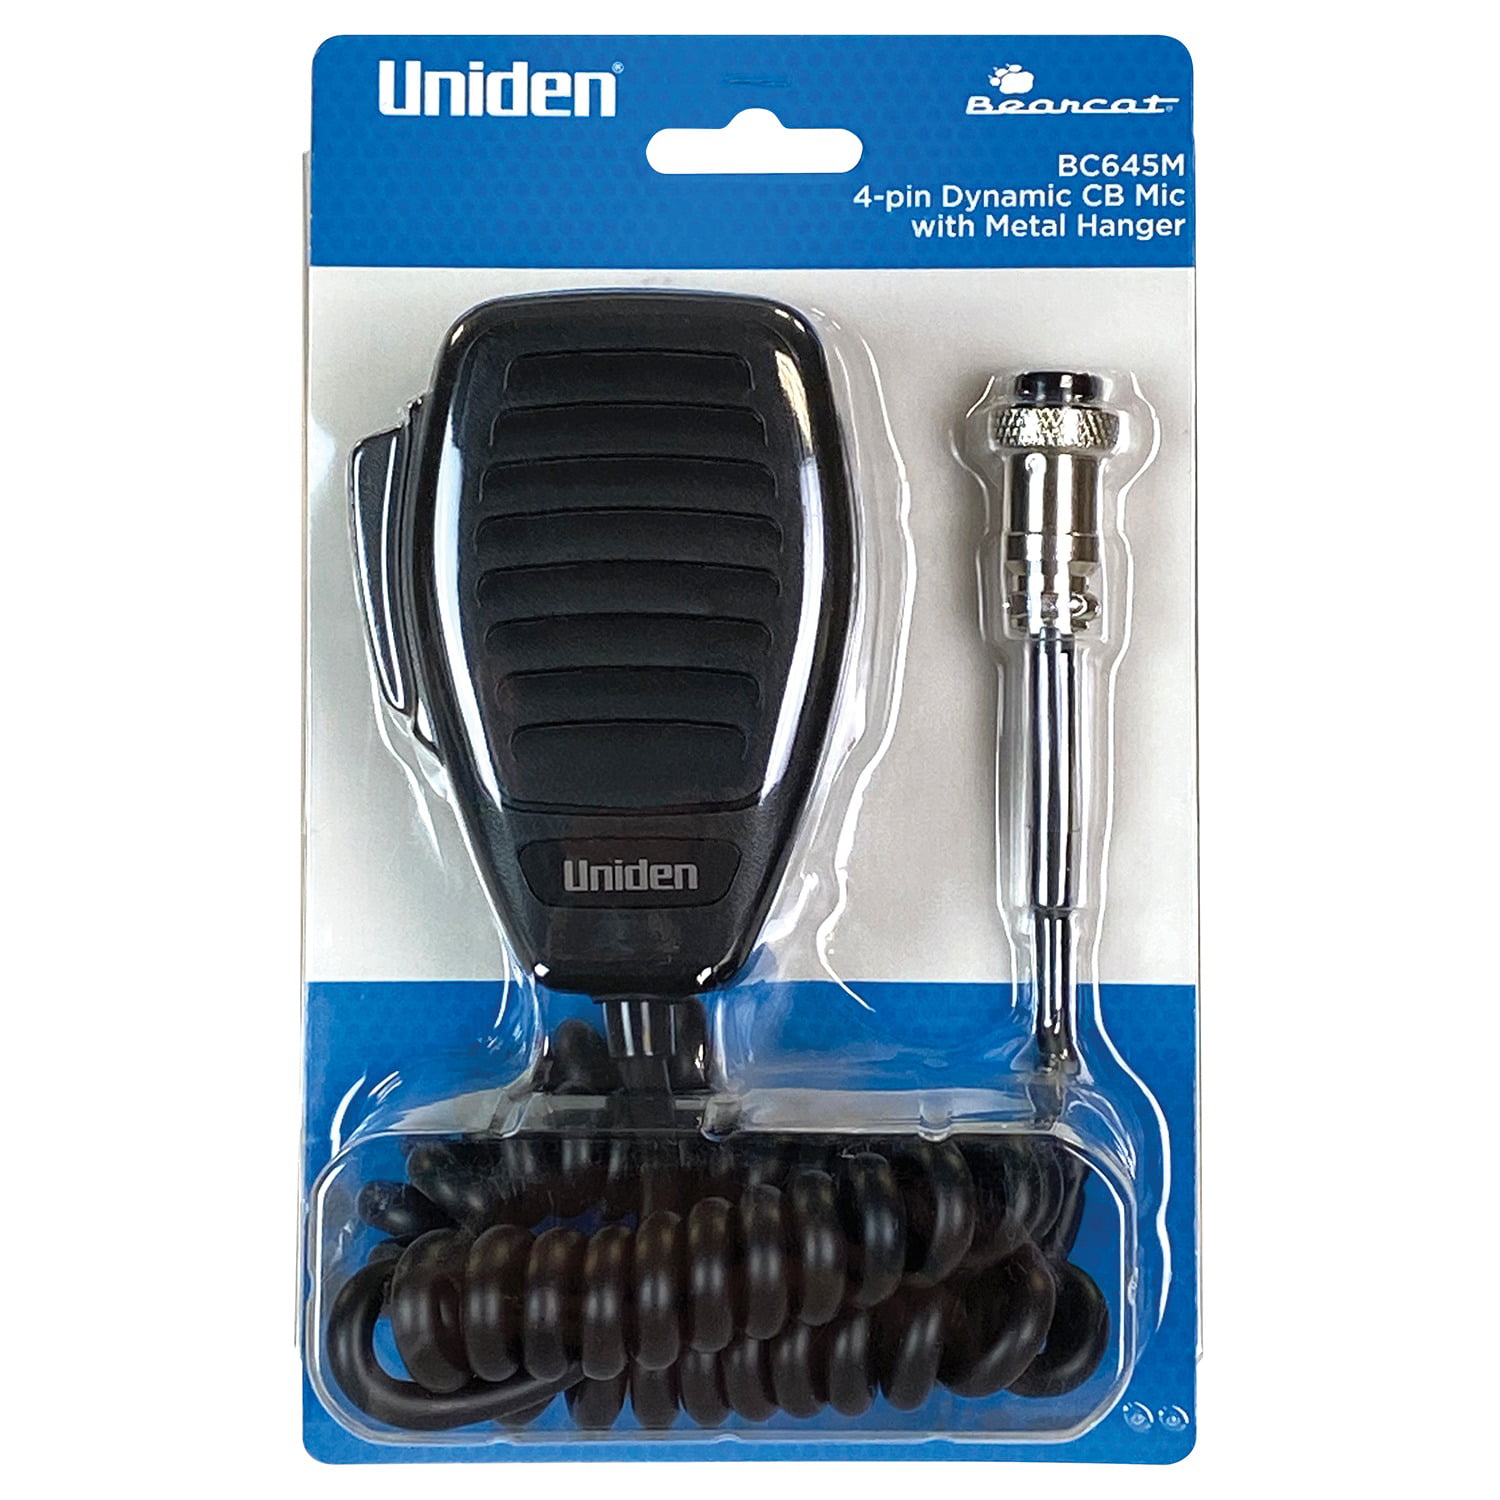 Uniden BC645M 4 Pin Dynamic CB Mic Compatible with All Models PC78 and PC88 Series with Metal Hanger for Durabilty 